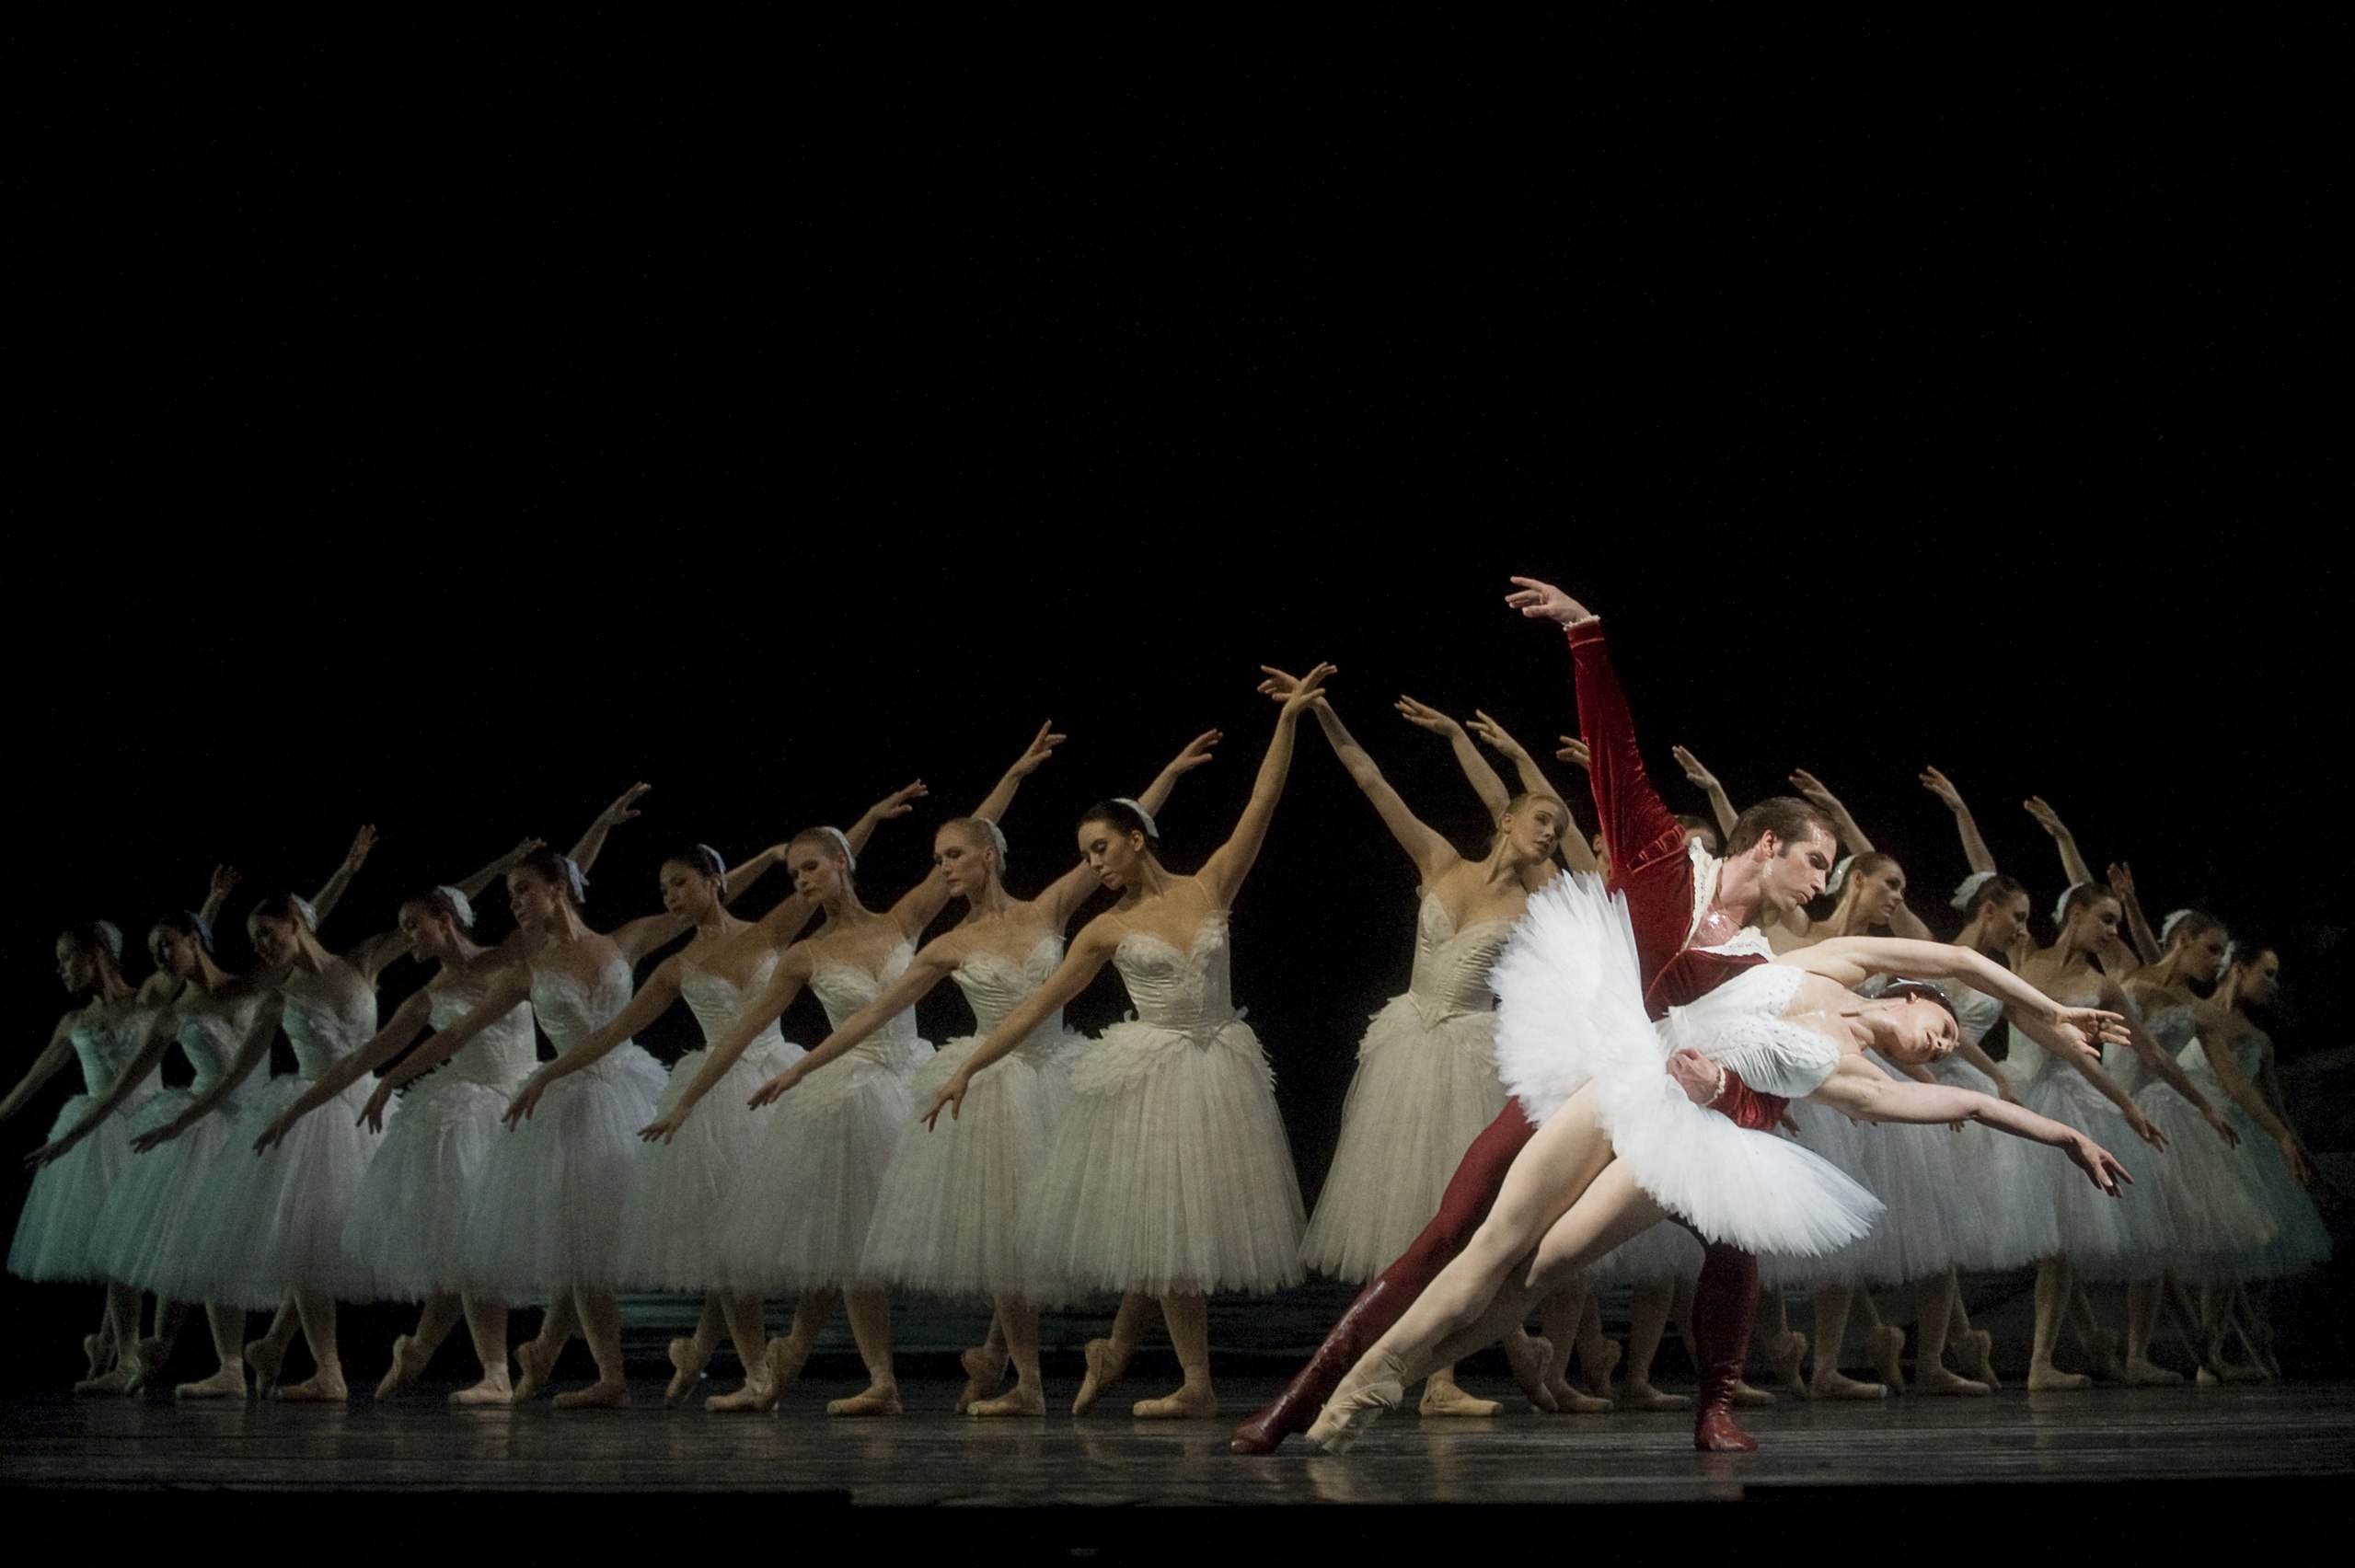 The ballet production, Swan Lake, is being performed.